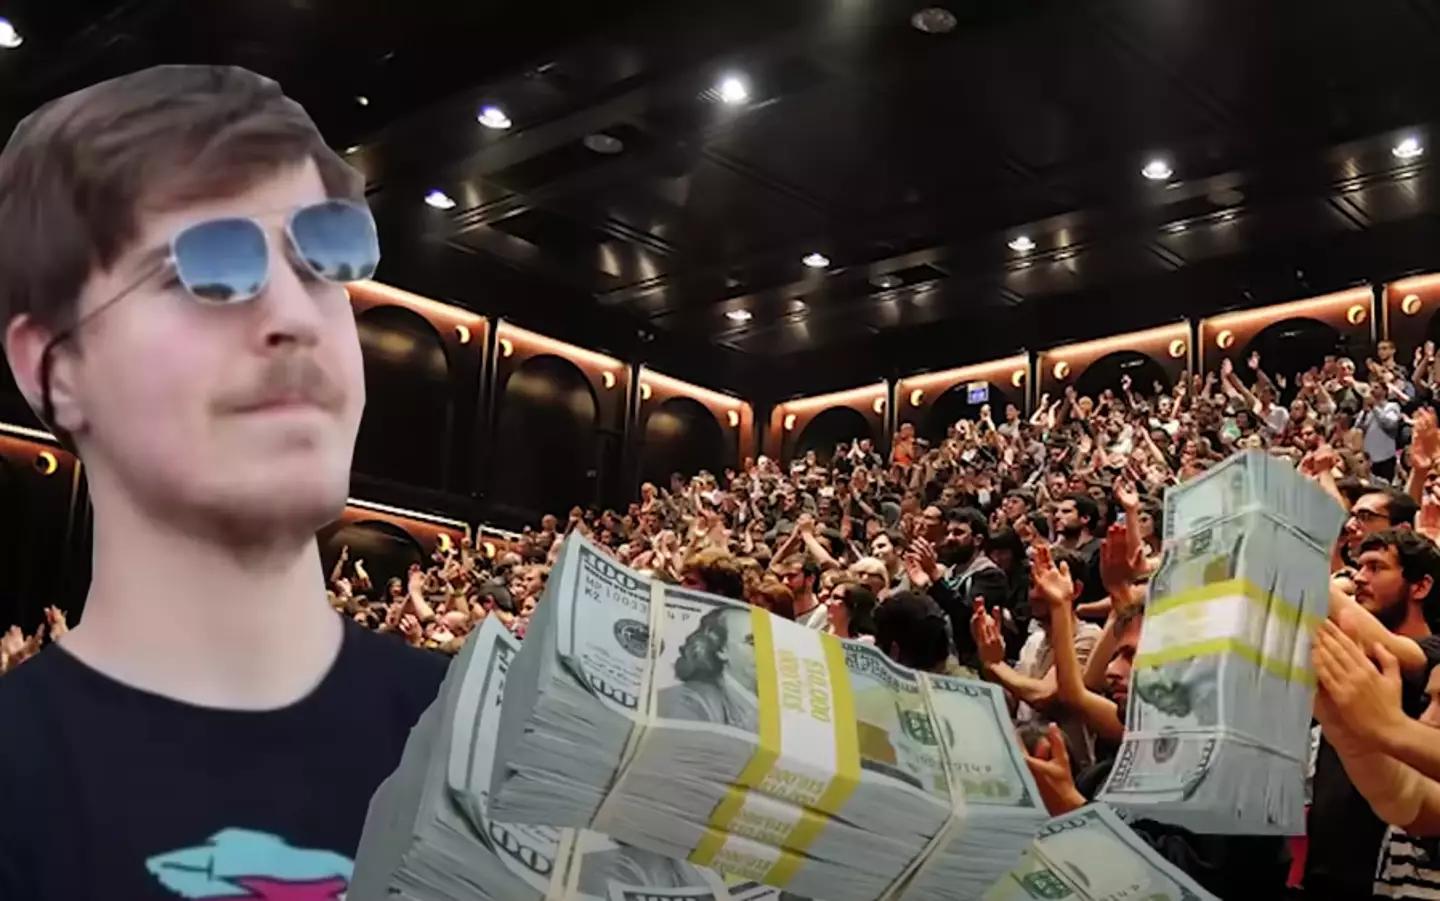 The American YouTuber is known for reinvesting much of his own money back into video production.